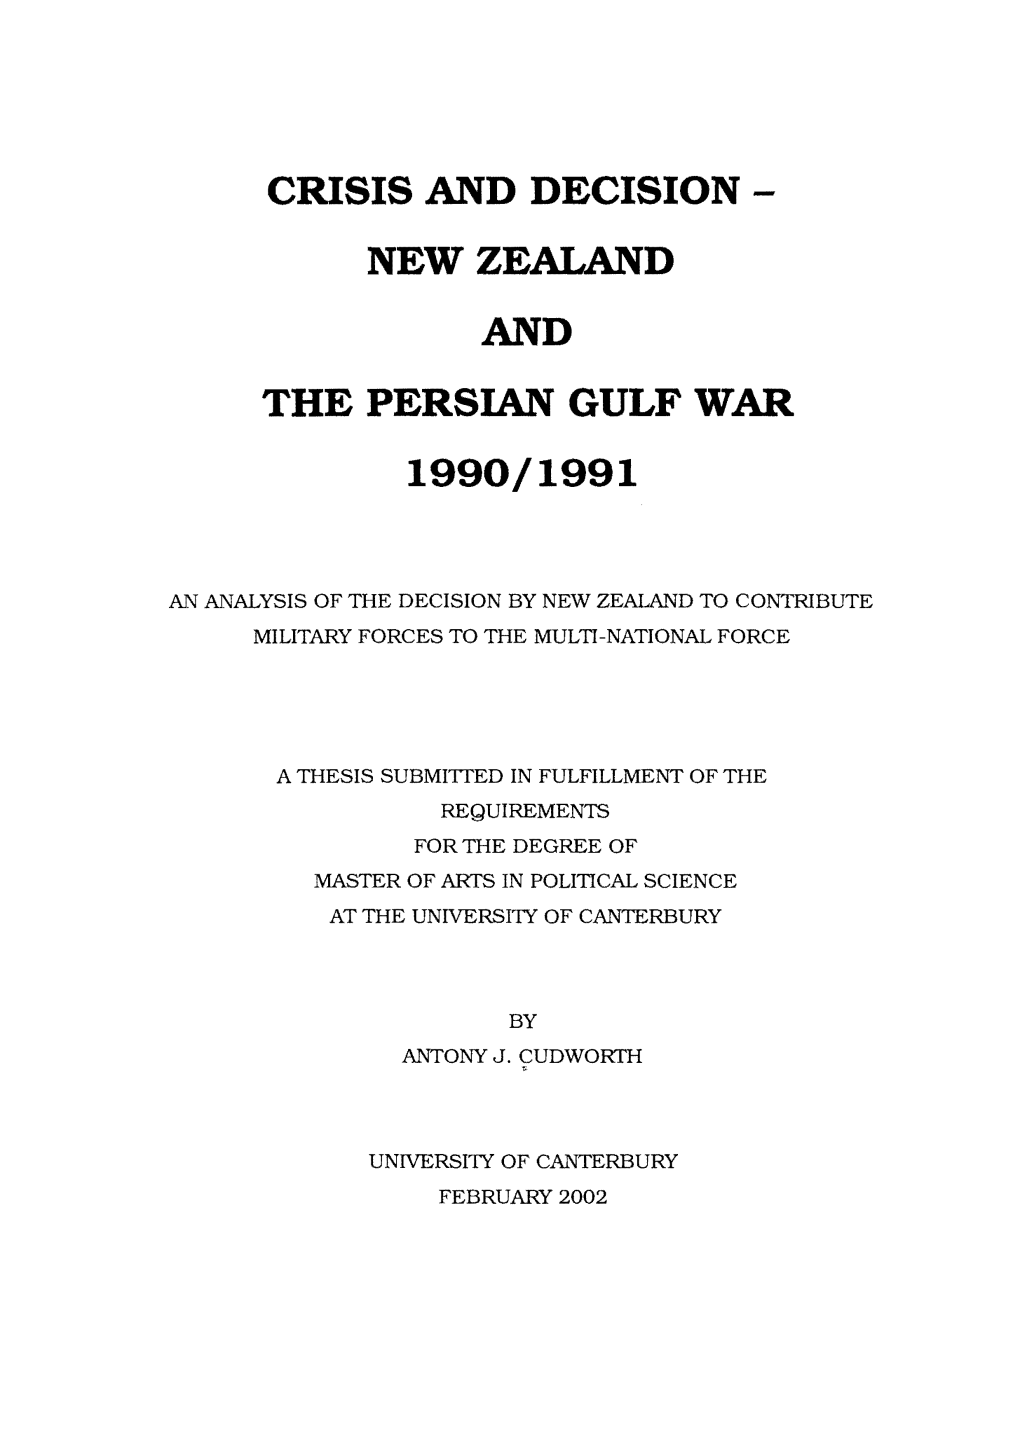 Crisis and Decision: New Zealand and the Persian Gulf War, 1990/1991